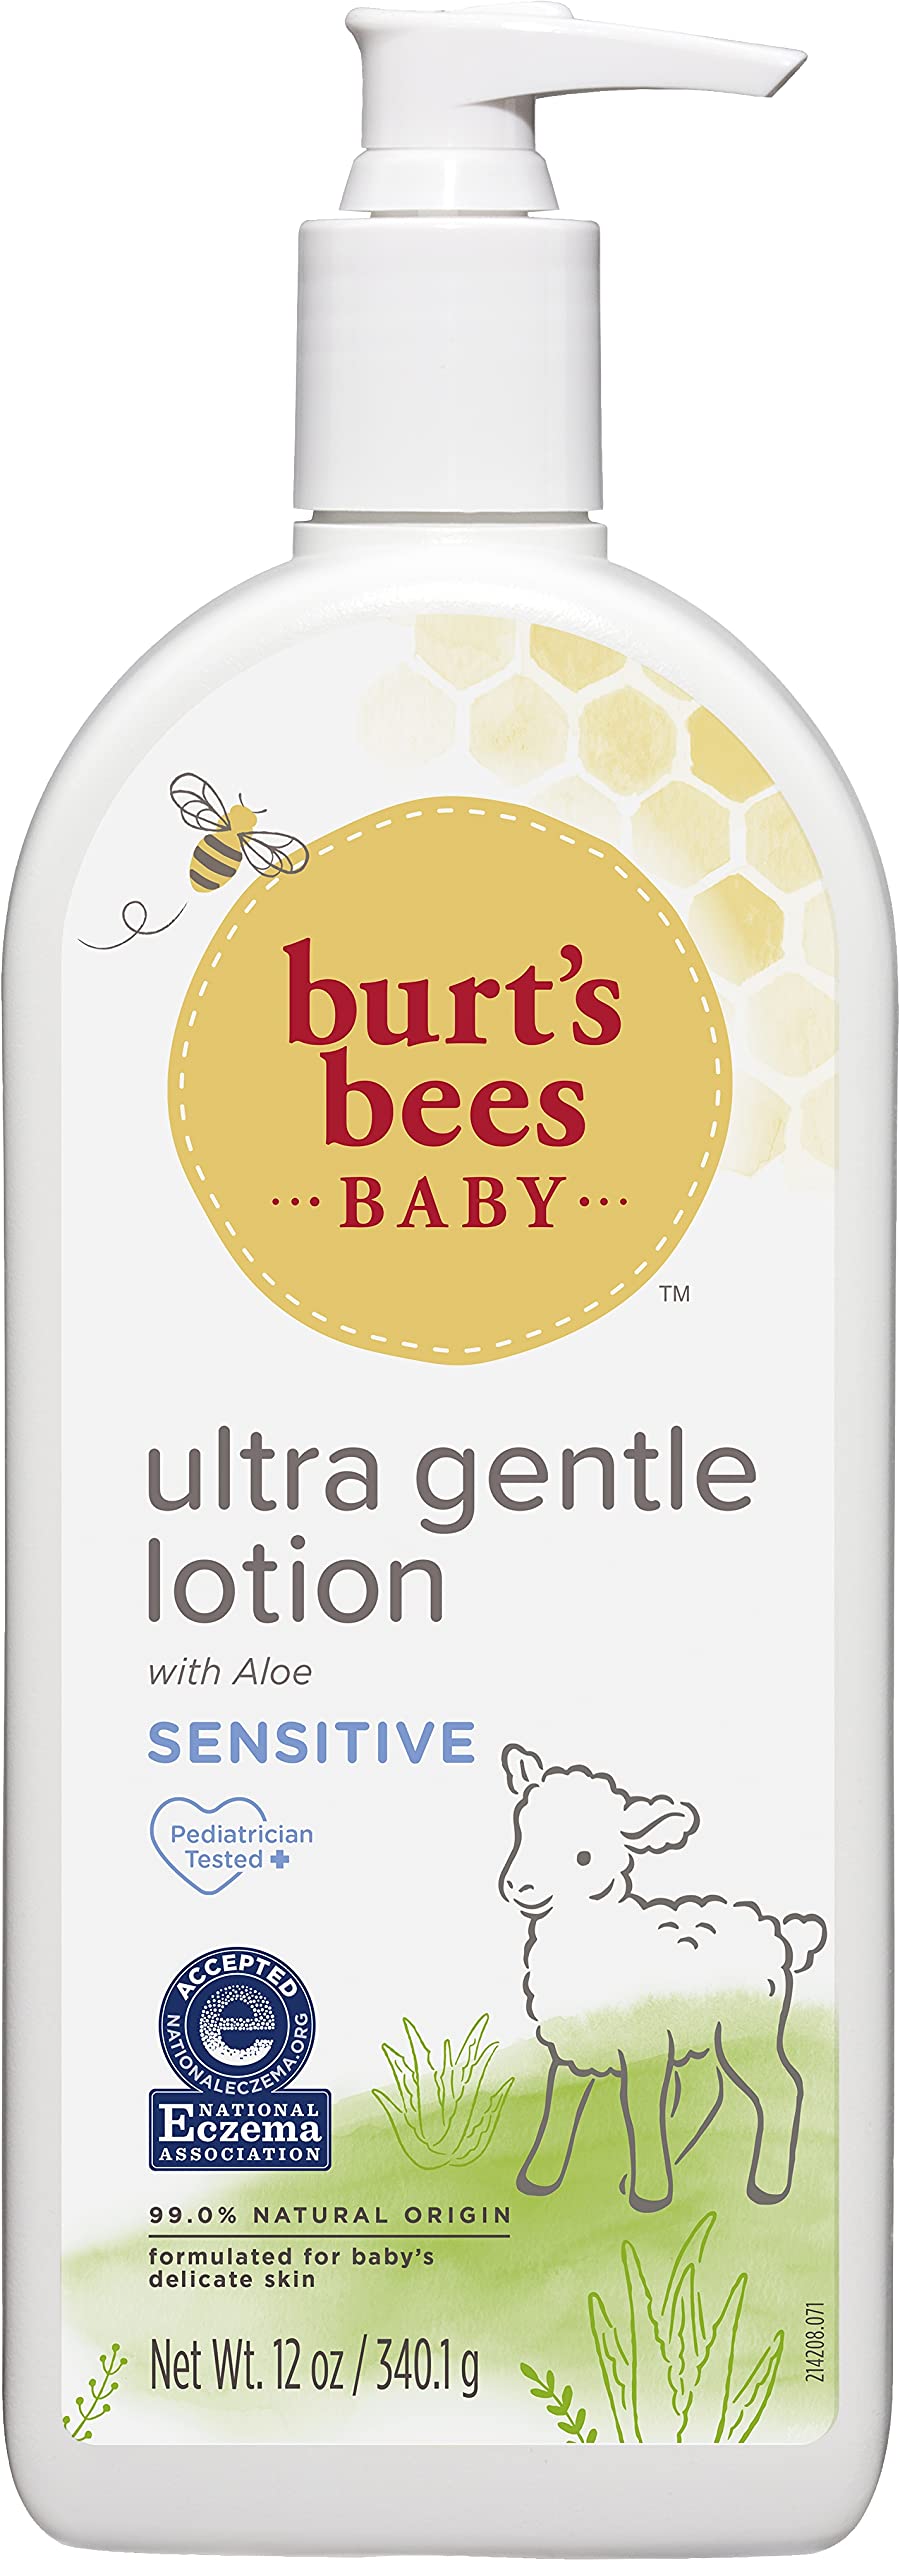 Burt's Bees Baby Ultra Gentle Lotion for Sensitive Skin - 12 Ounce (Pack of 3)